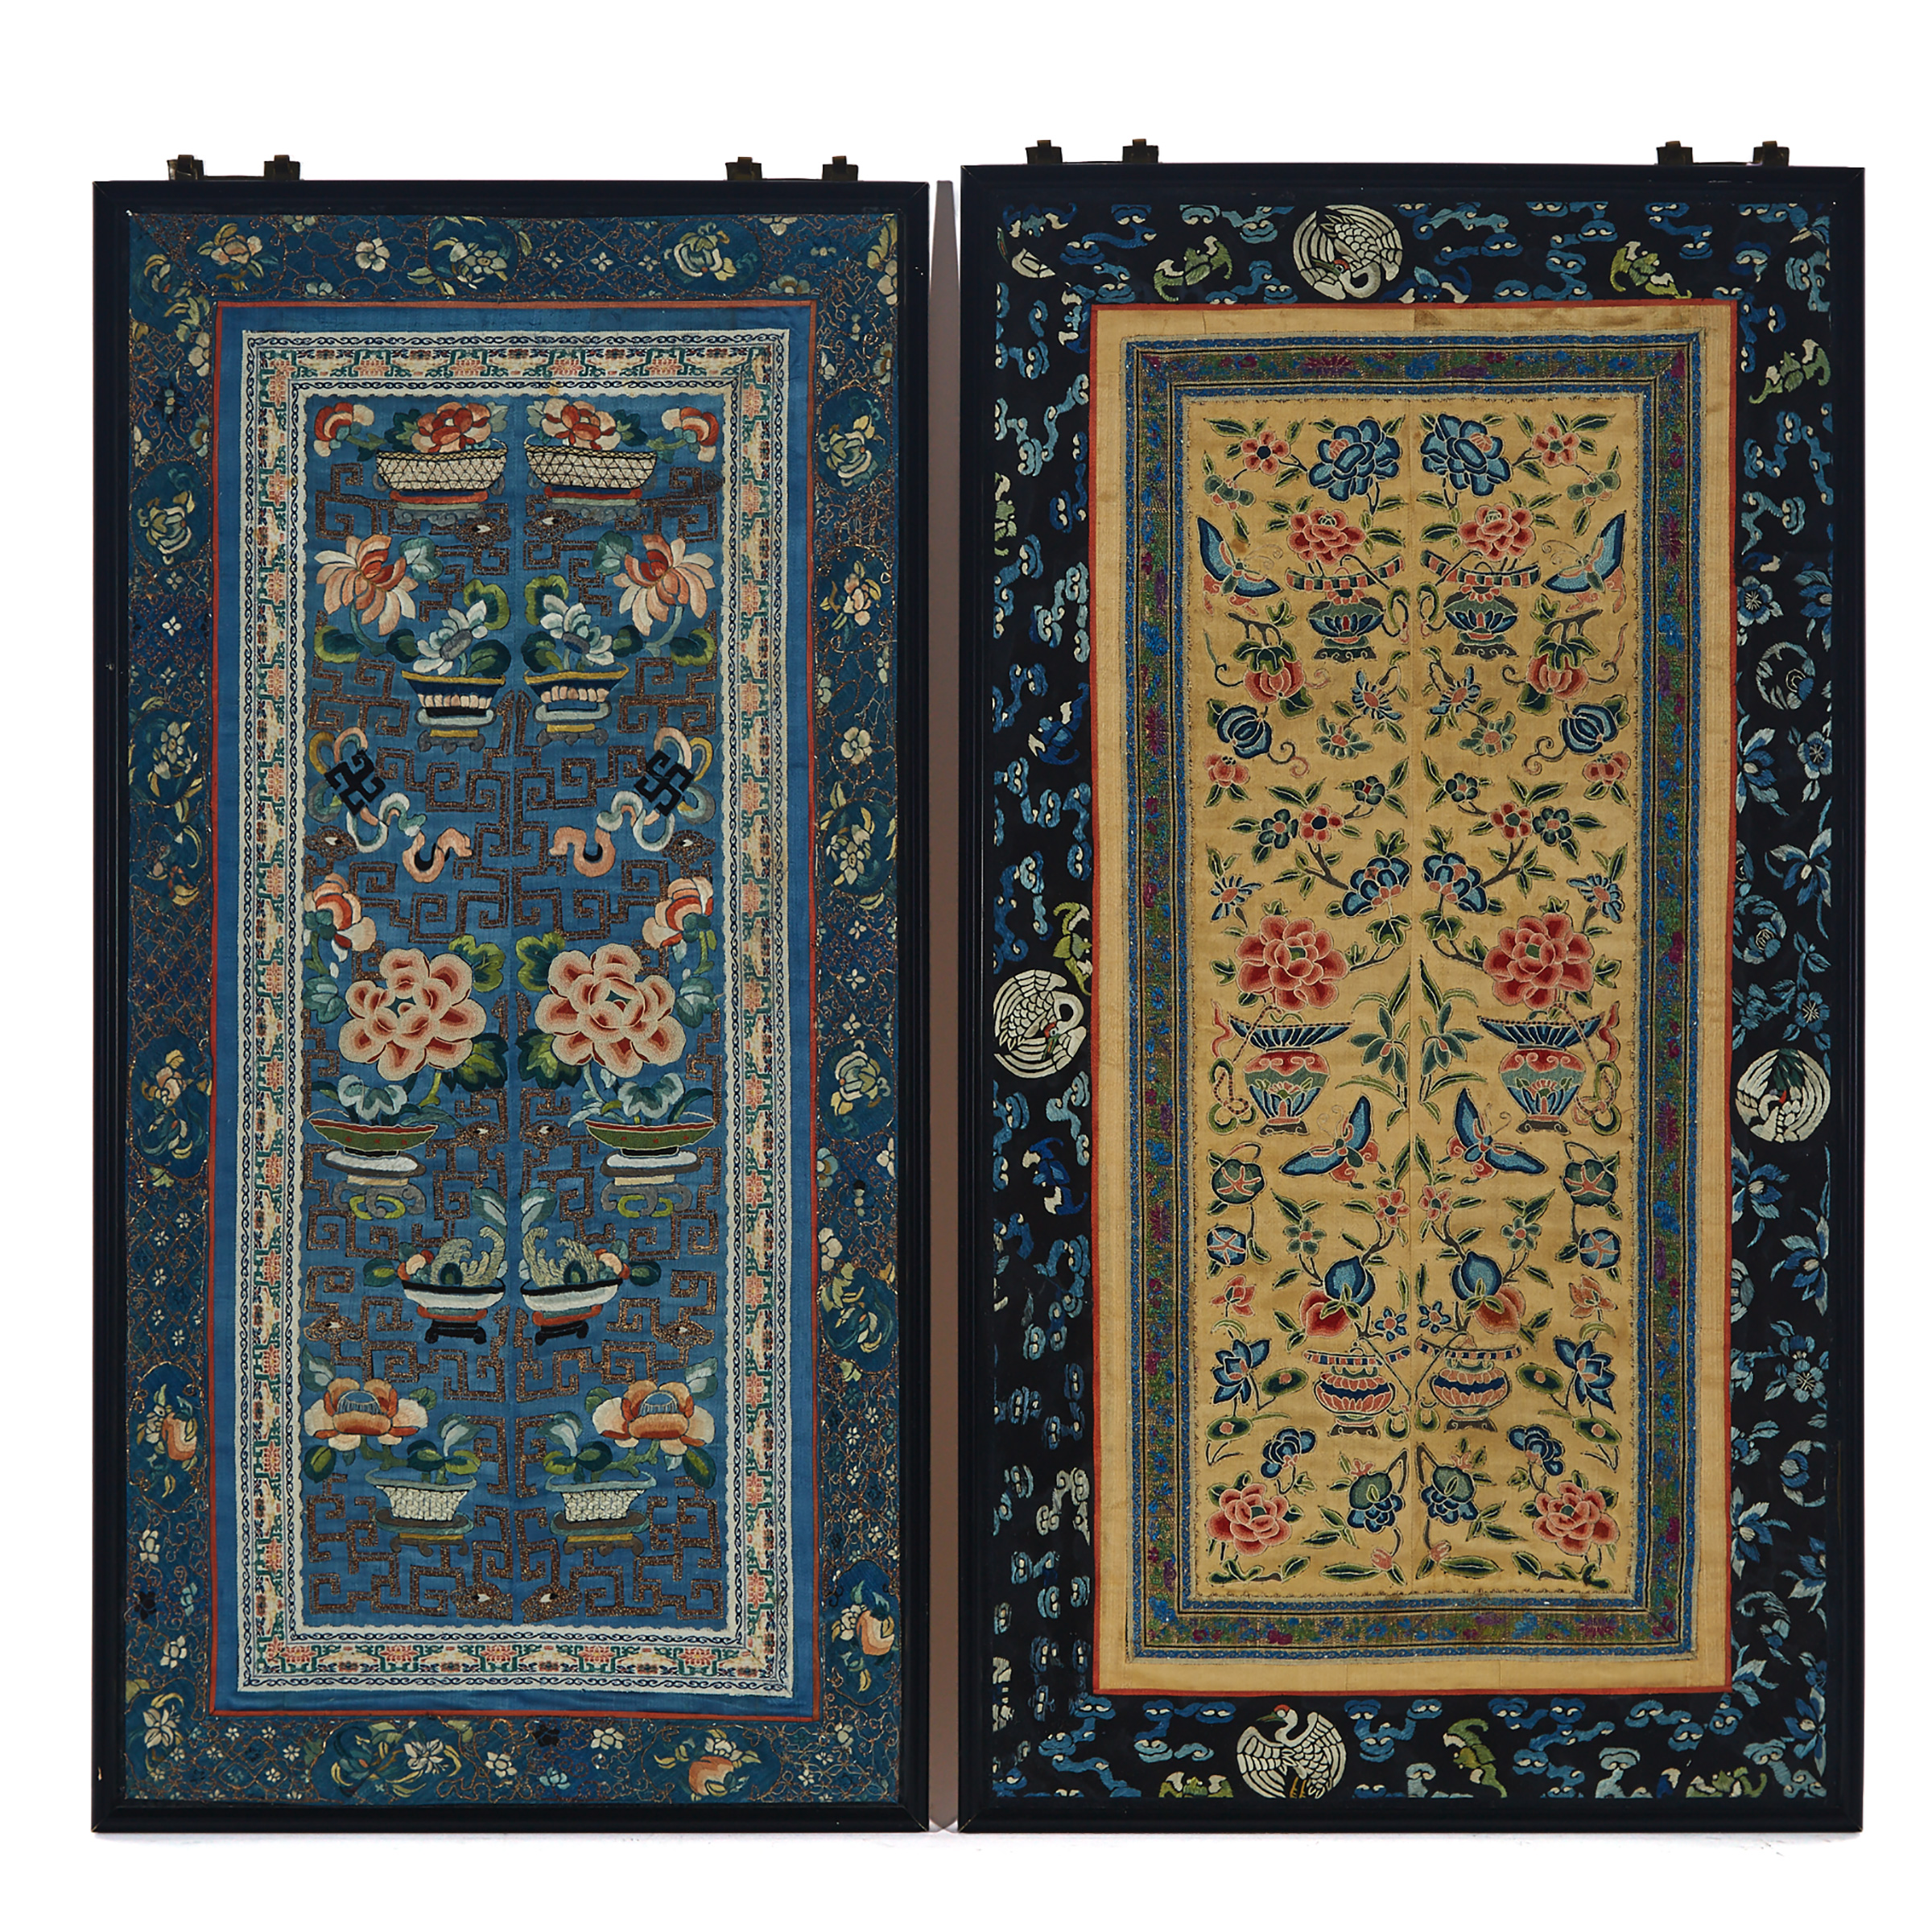 Two Framed Chinese Silk Embroideries